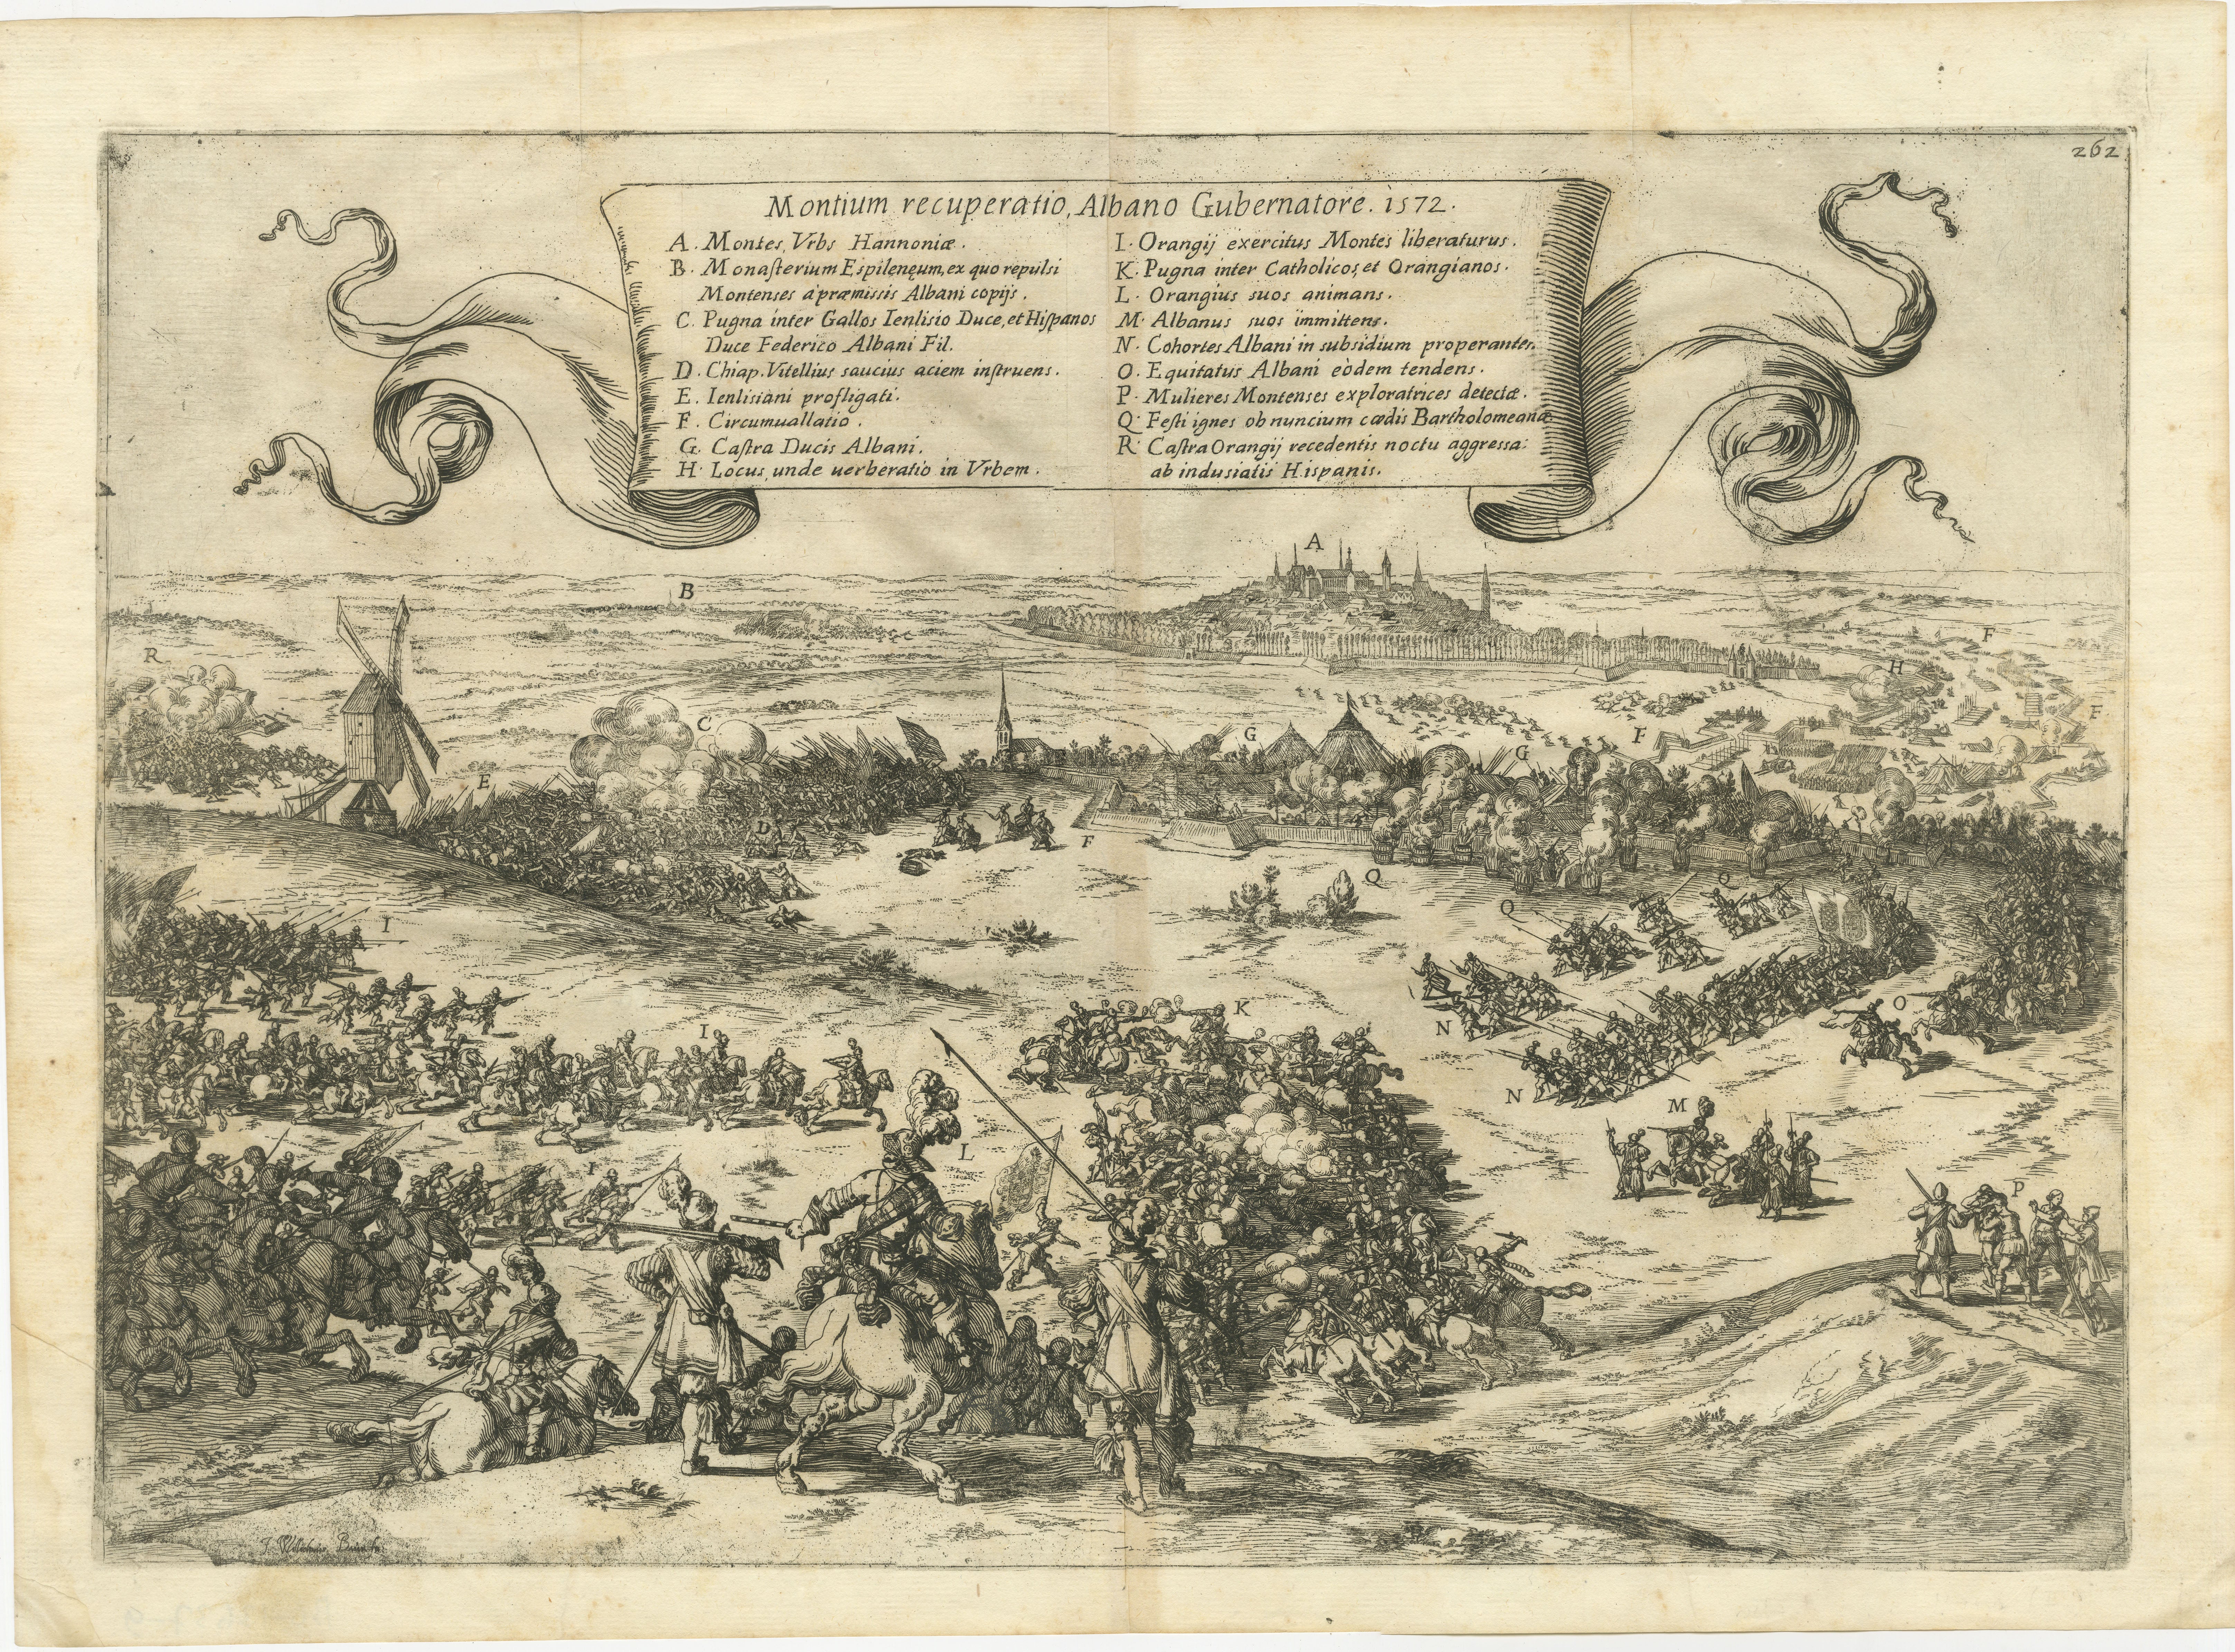 The print is a historical depiction of the Siege of Bergen (also known as Mons) in Hainaut in 1572, during the Eighty Years' War. 

This event is significant as it involved Count Louis of Nassau capturing Bergen with stratagem and subsequently being